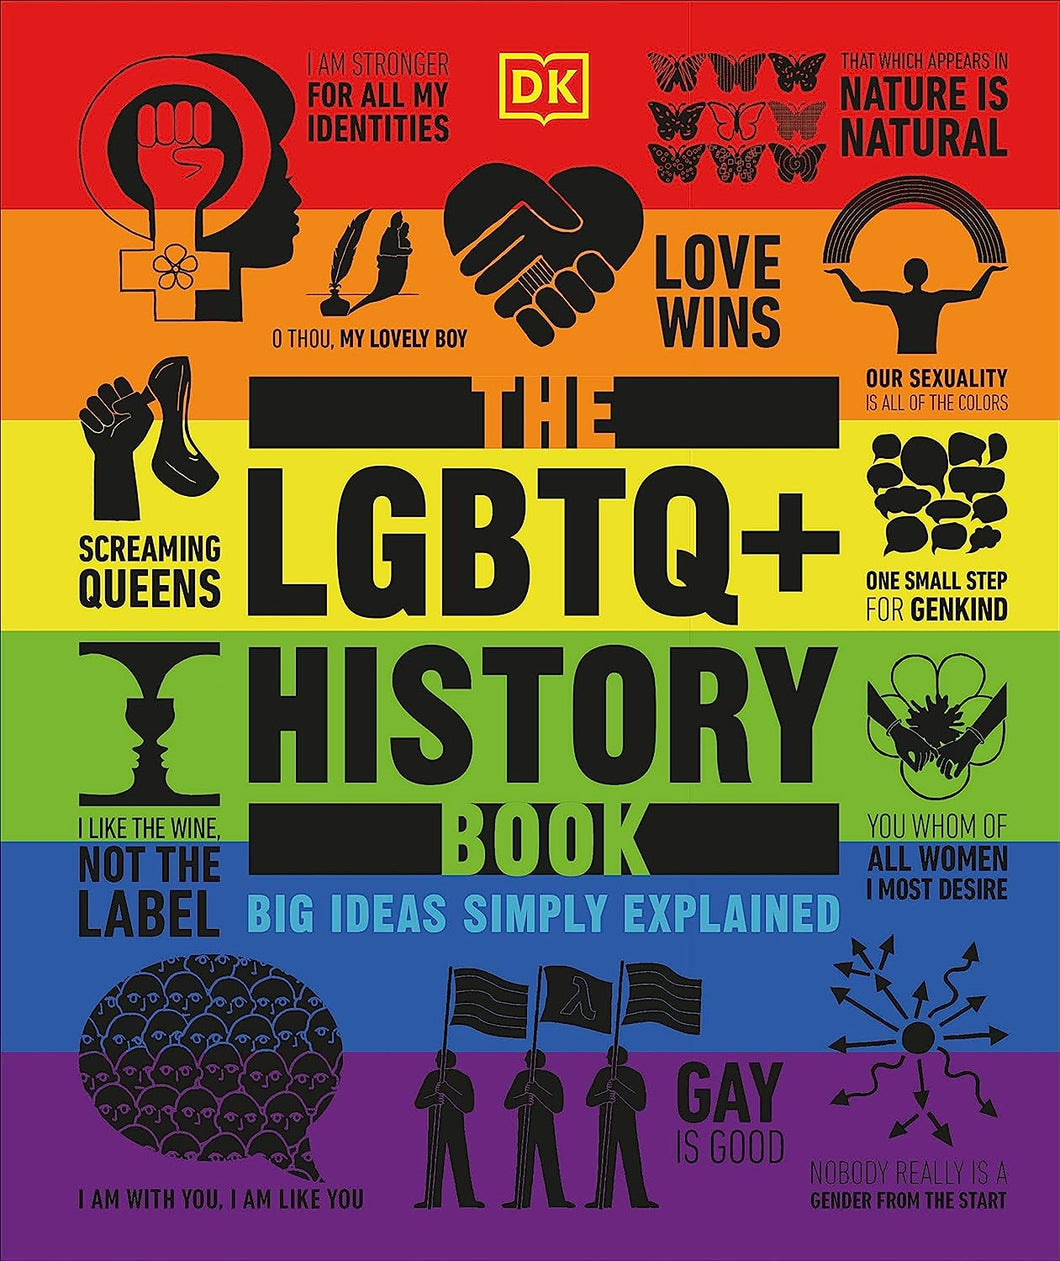 The LGBTQ+ History Book: Big Ideas Simply Explained [DK]